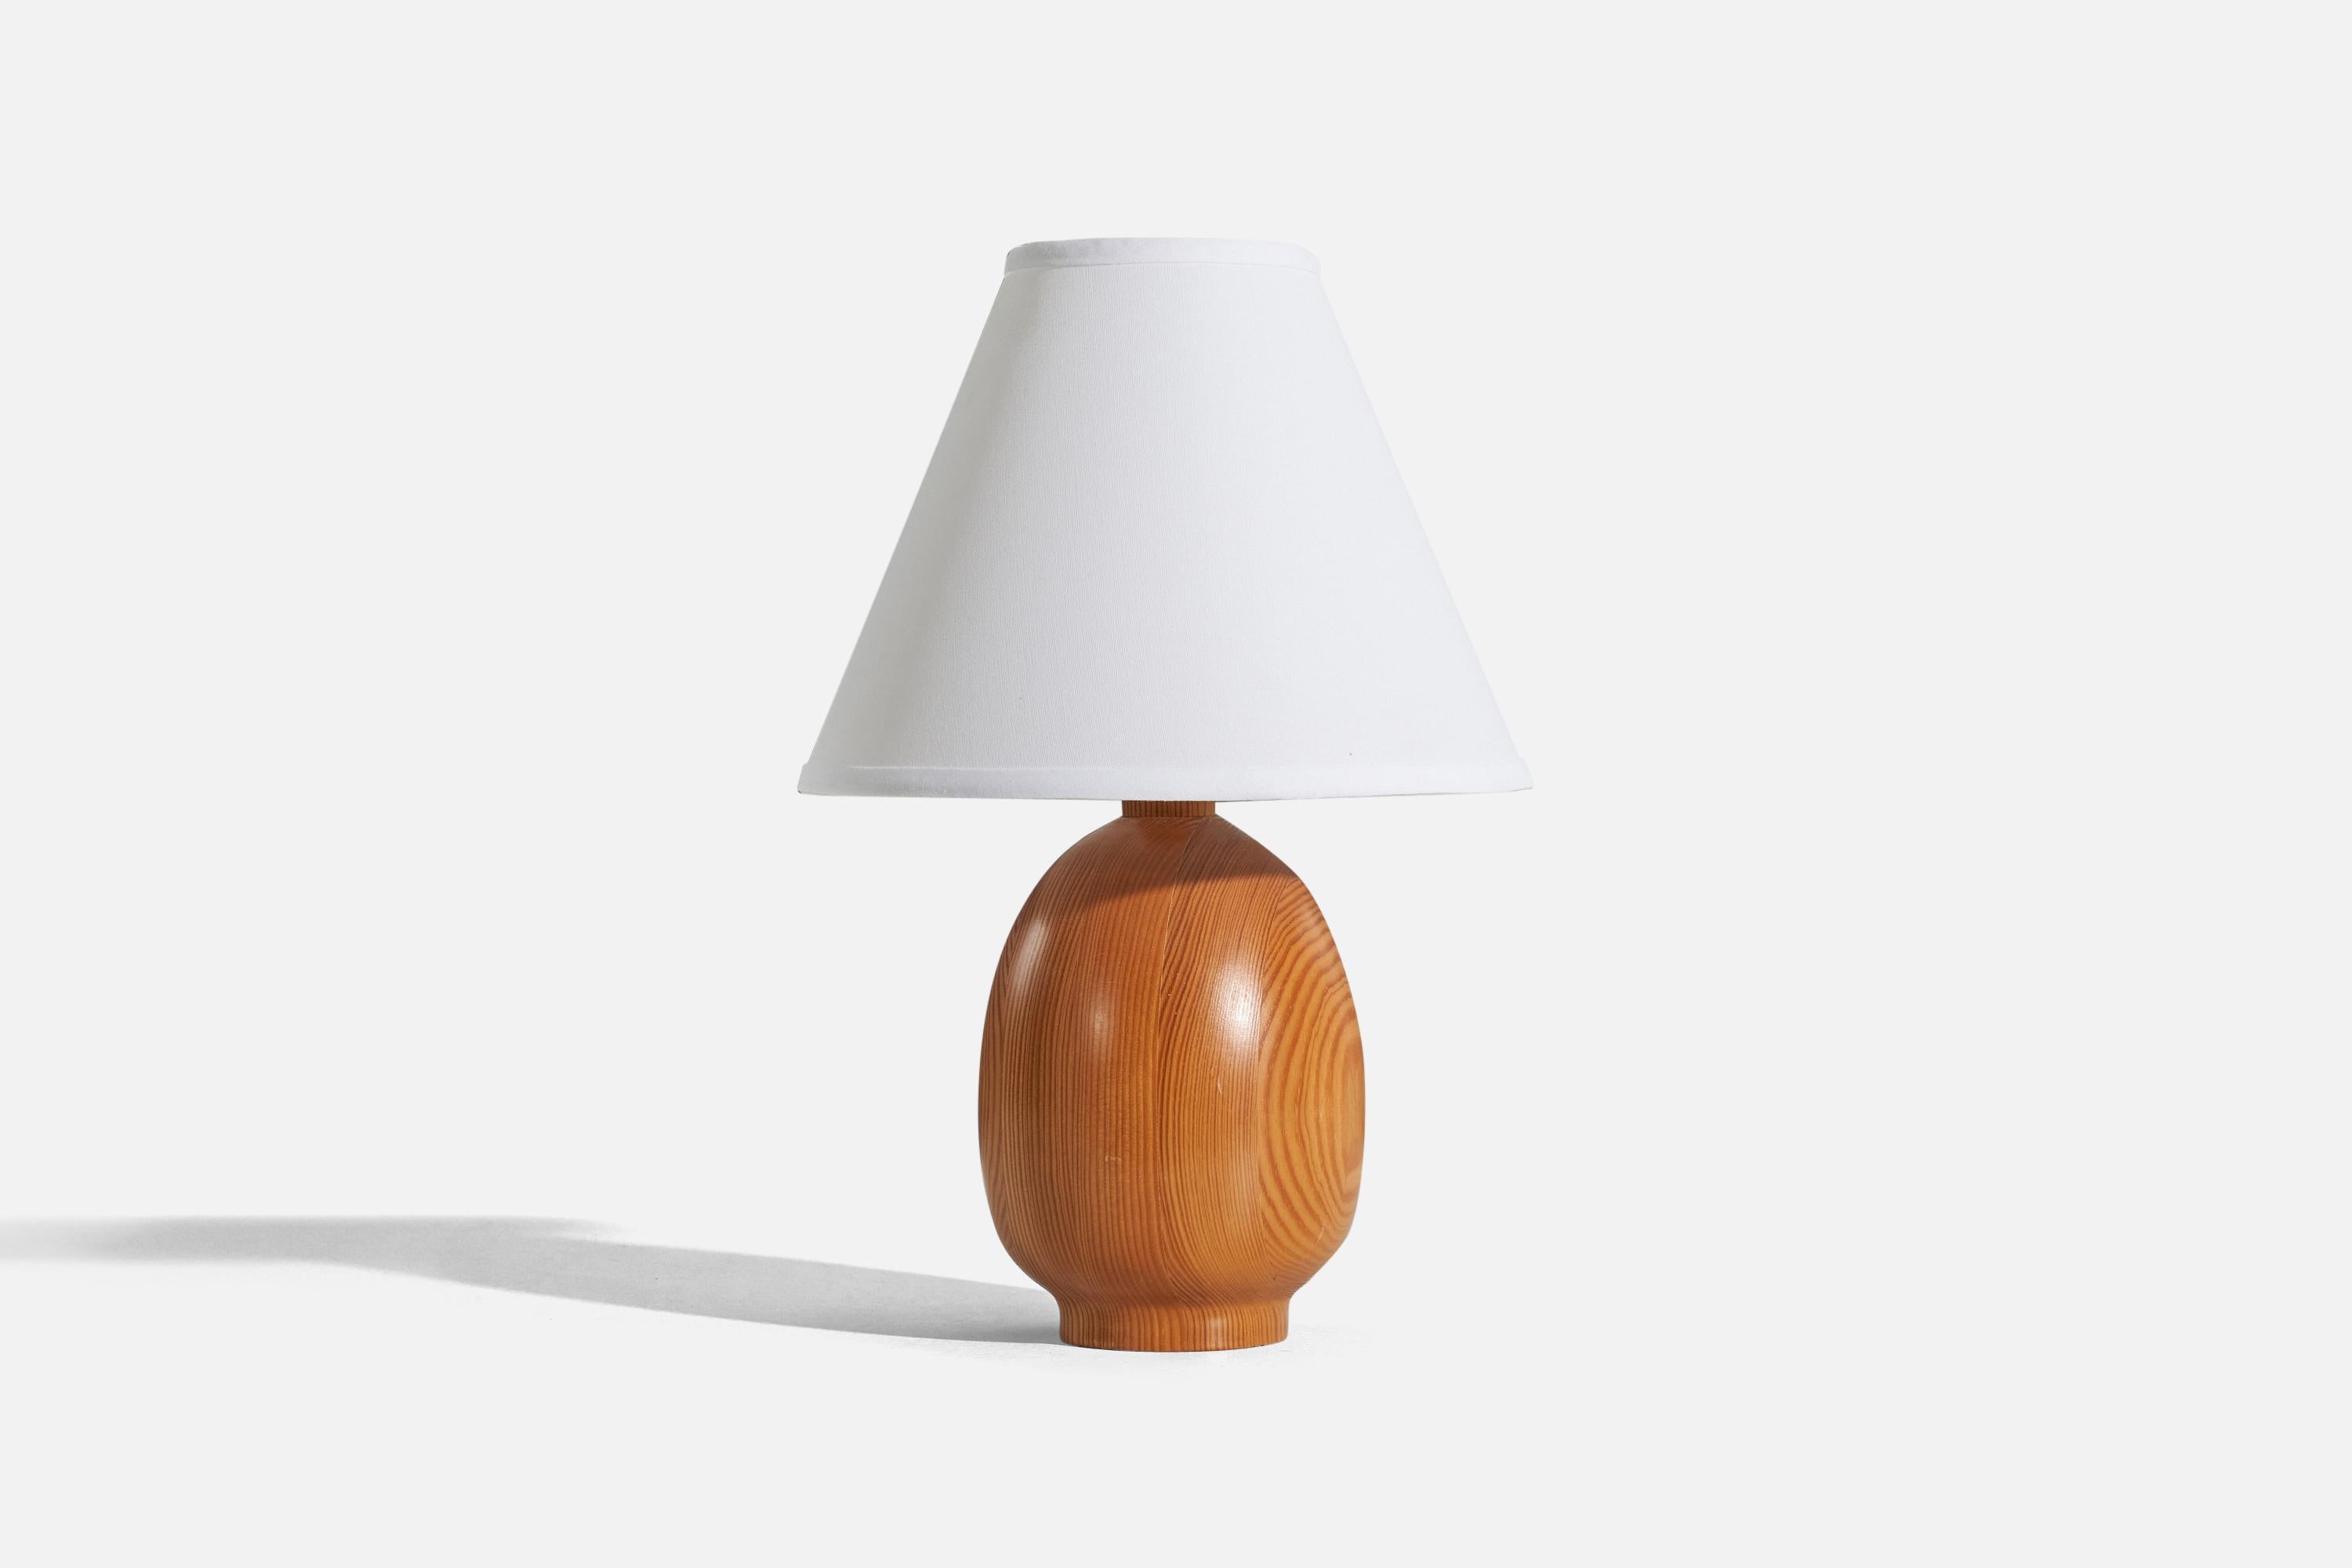 A solid pine table lamp designed and produced by Markslöjd, Kinna, Sweden, c. 1970s.

Sold without lampshade. 
Dimensions of Lamp (inches) : 11.3125 x 5.375 x 5.375 (H x W x D)
Dimensions of Shade (inches) : 4.25 x 10.25 x 8 (T x B x